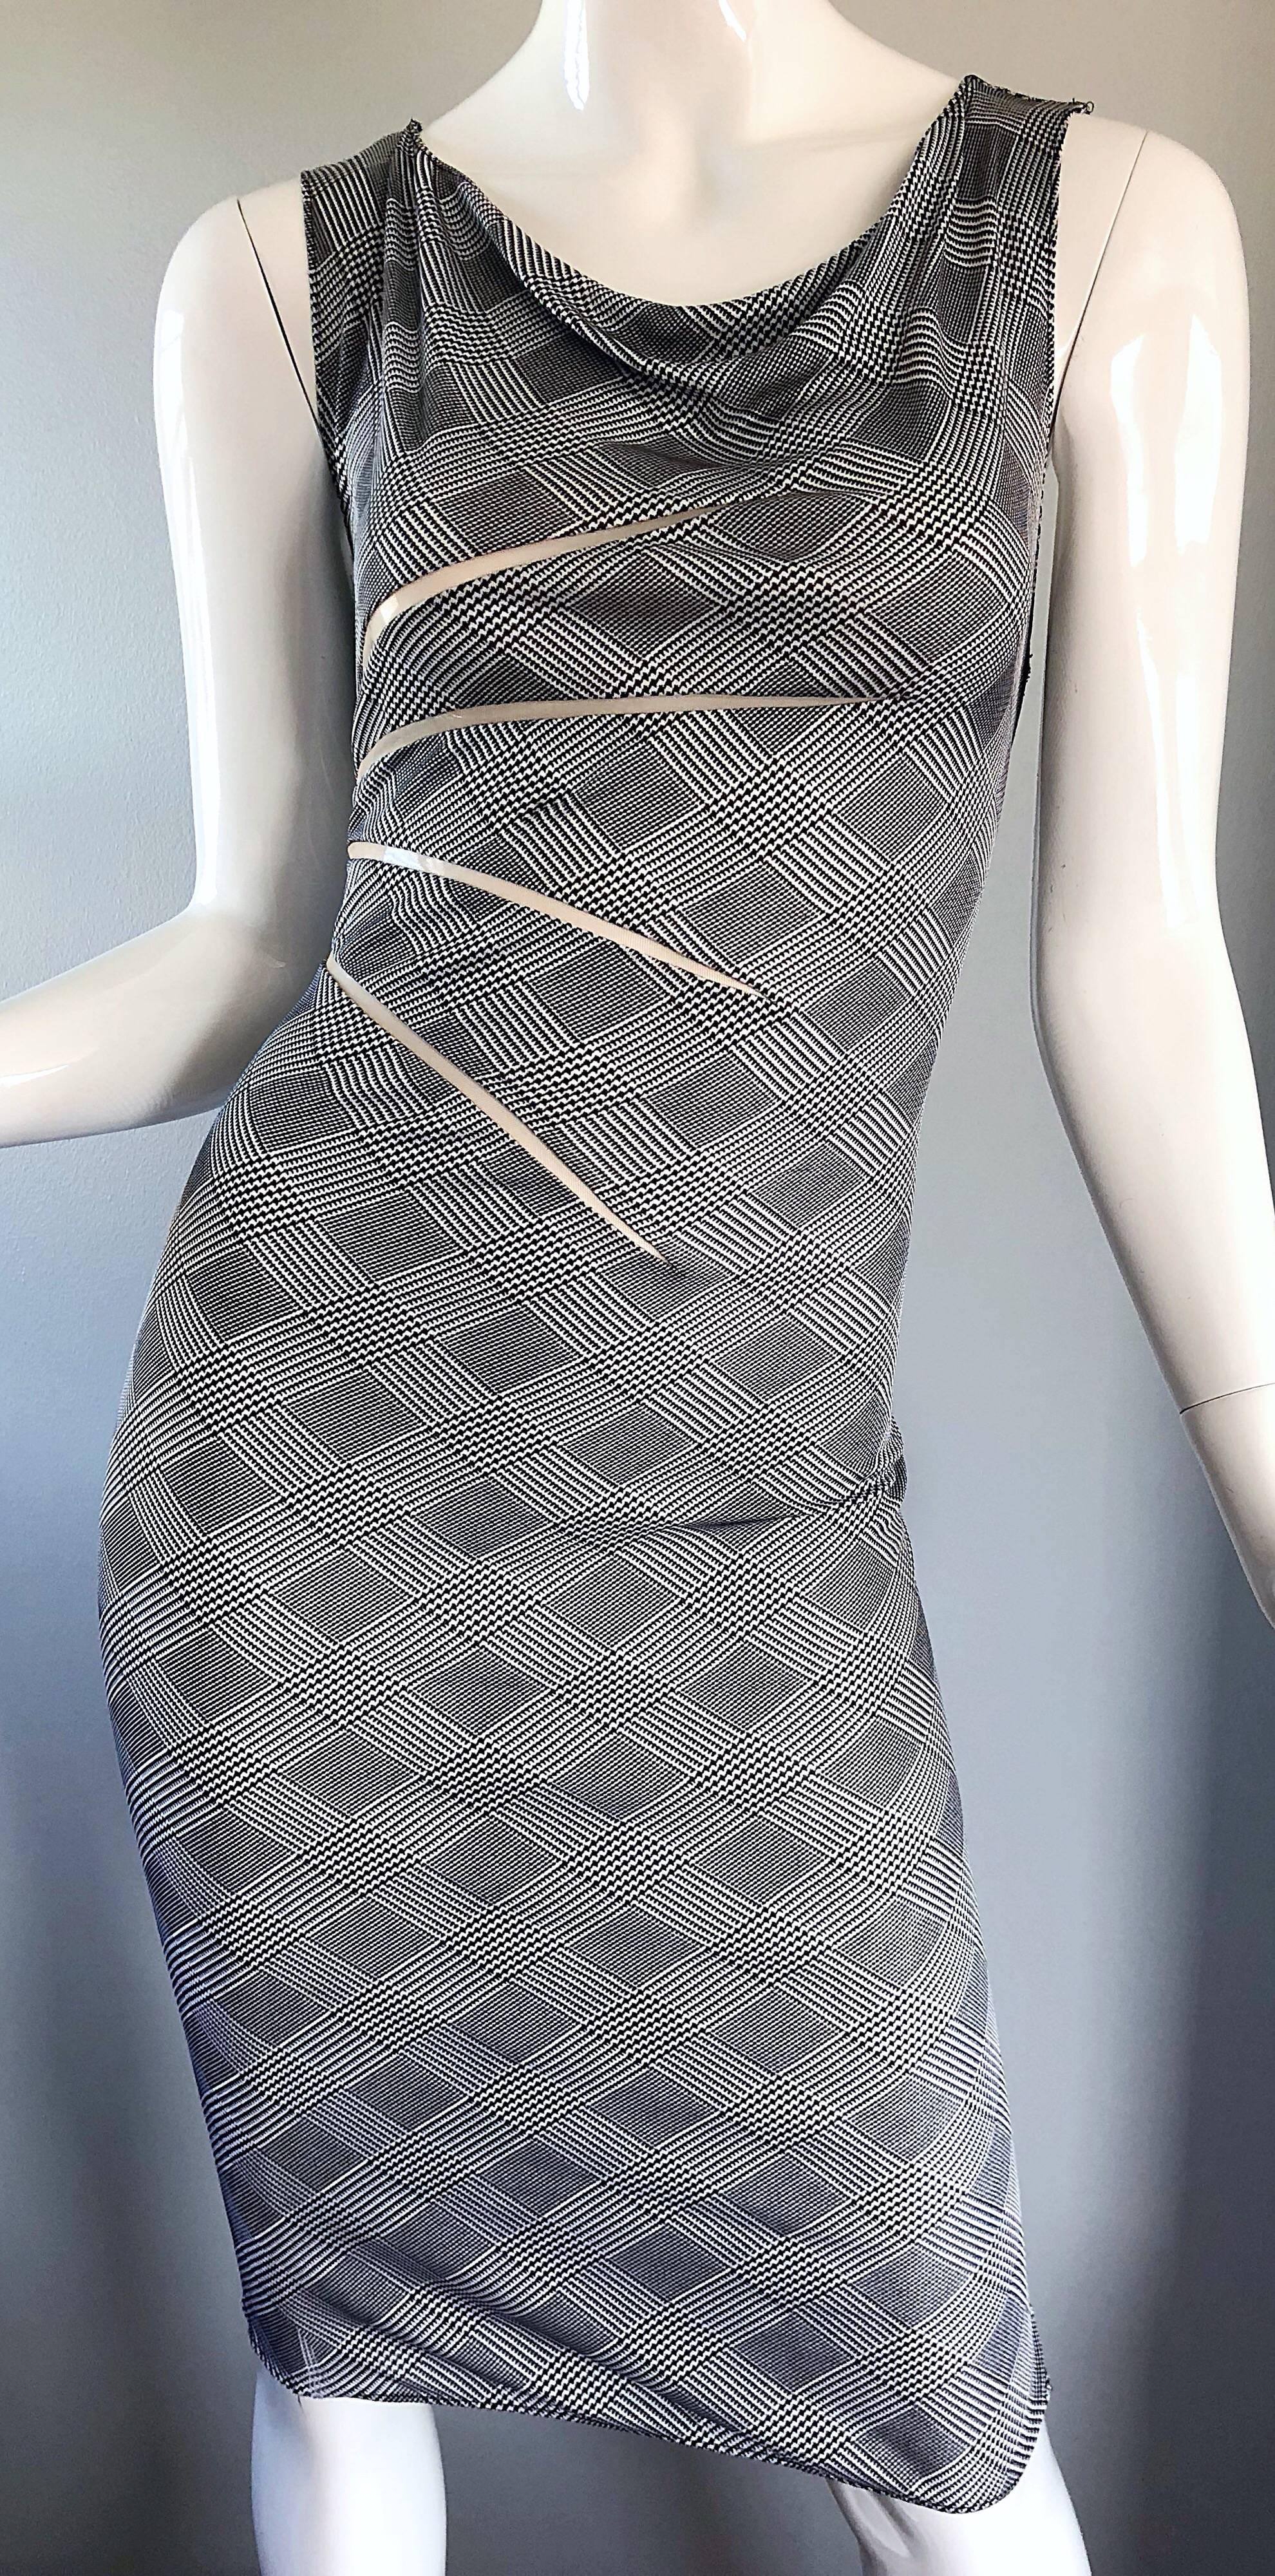 Gianni Versace Couture Rare S / S 1998 Vintage Black and White Cut - Out Dress For Sale 1